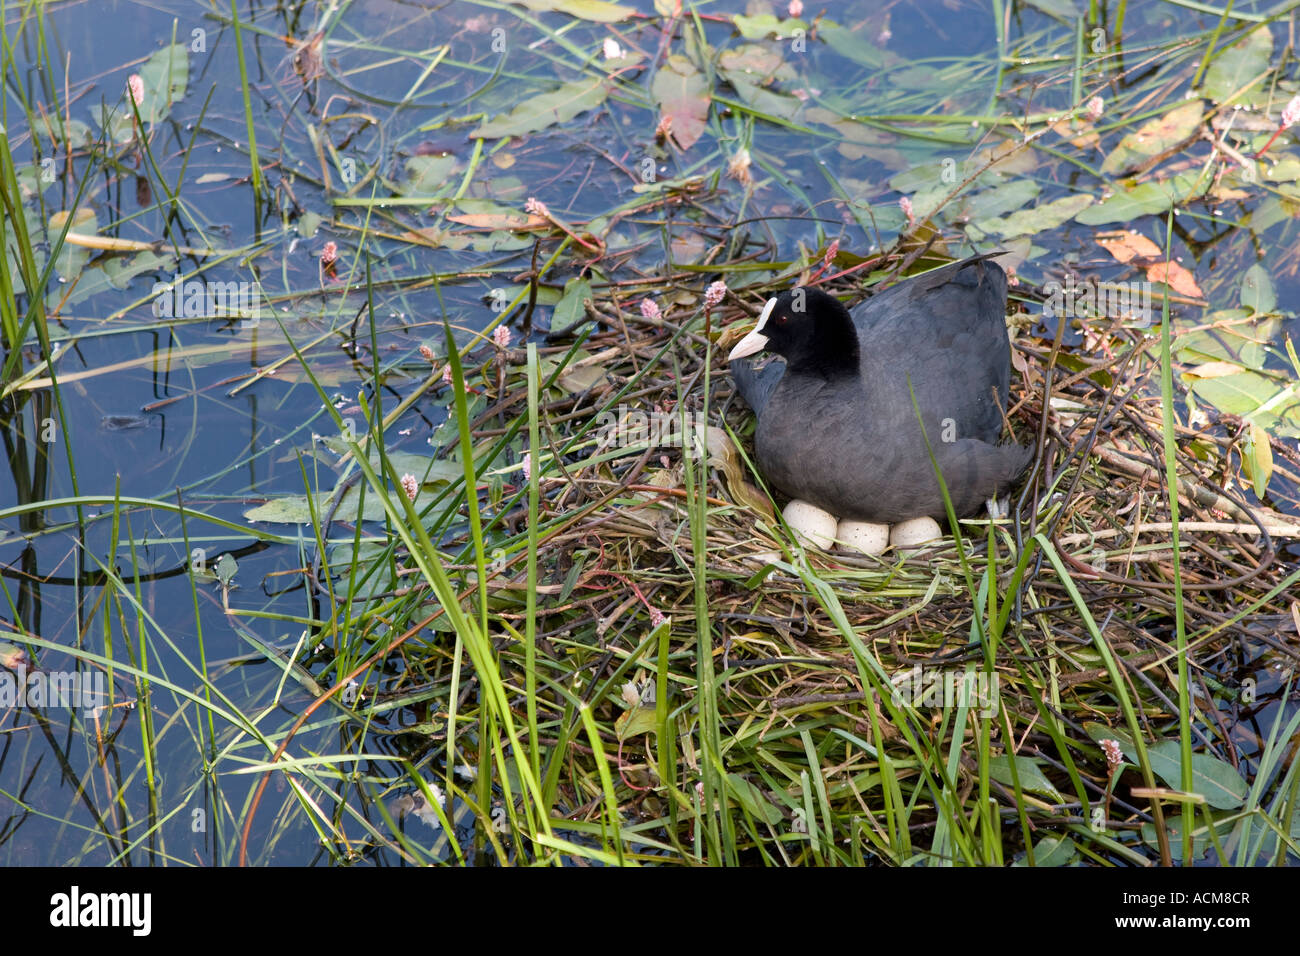 Common coot with nest and eggs Stock Photo